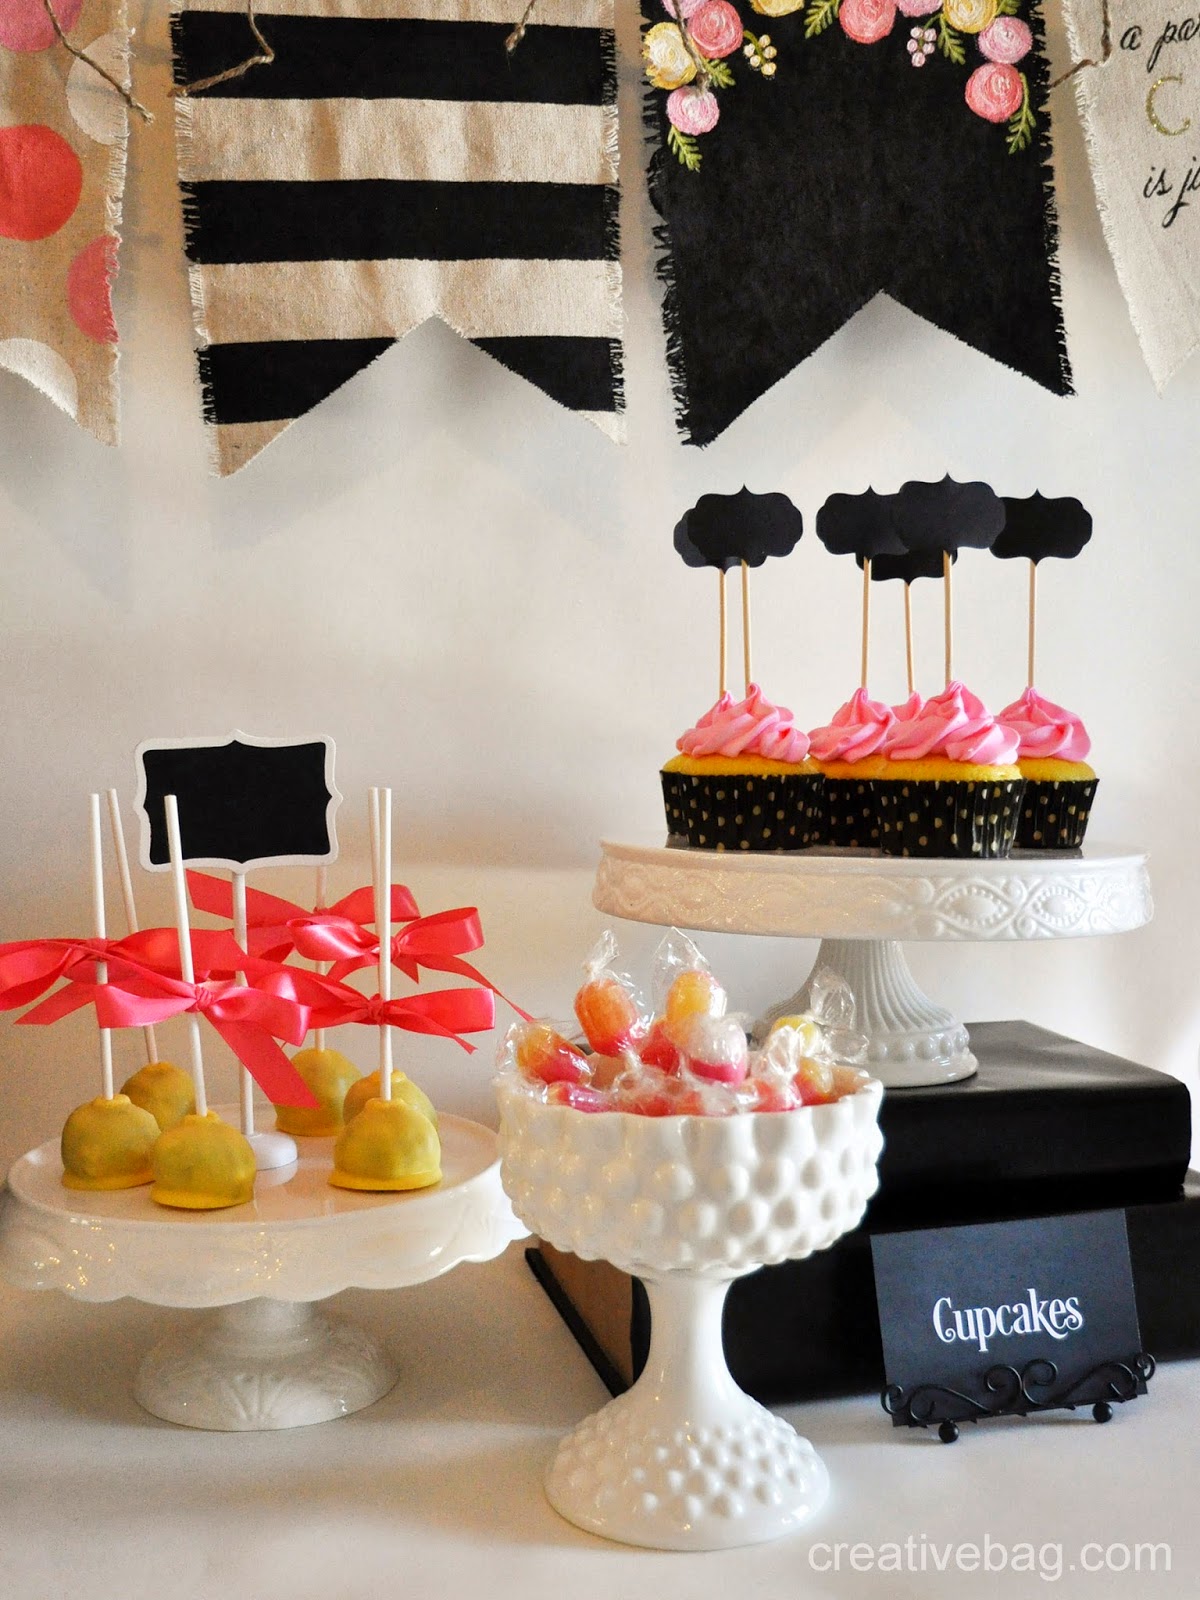 Fabulous diy sweet table supplies for parties, weddings and special events | creativebag.com